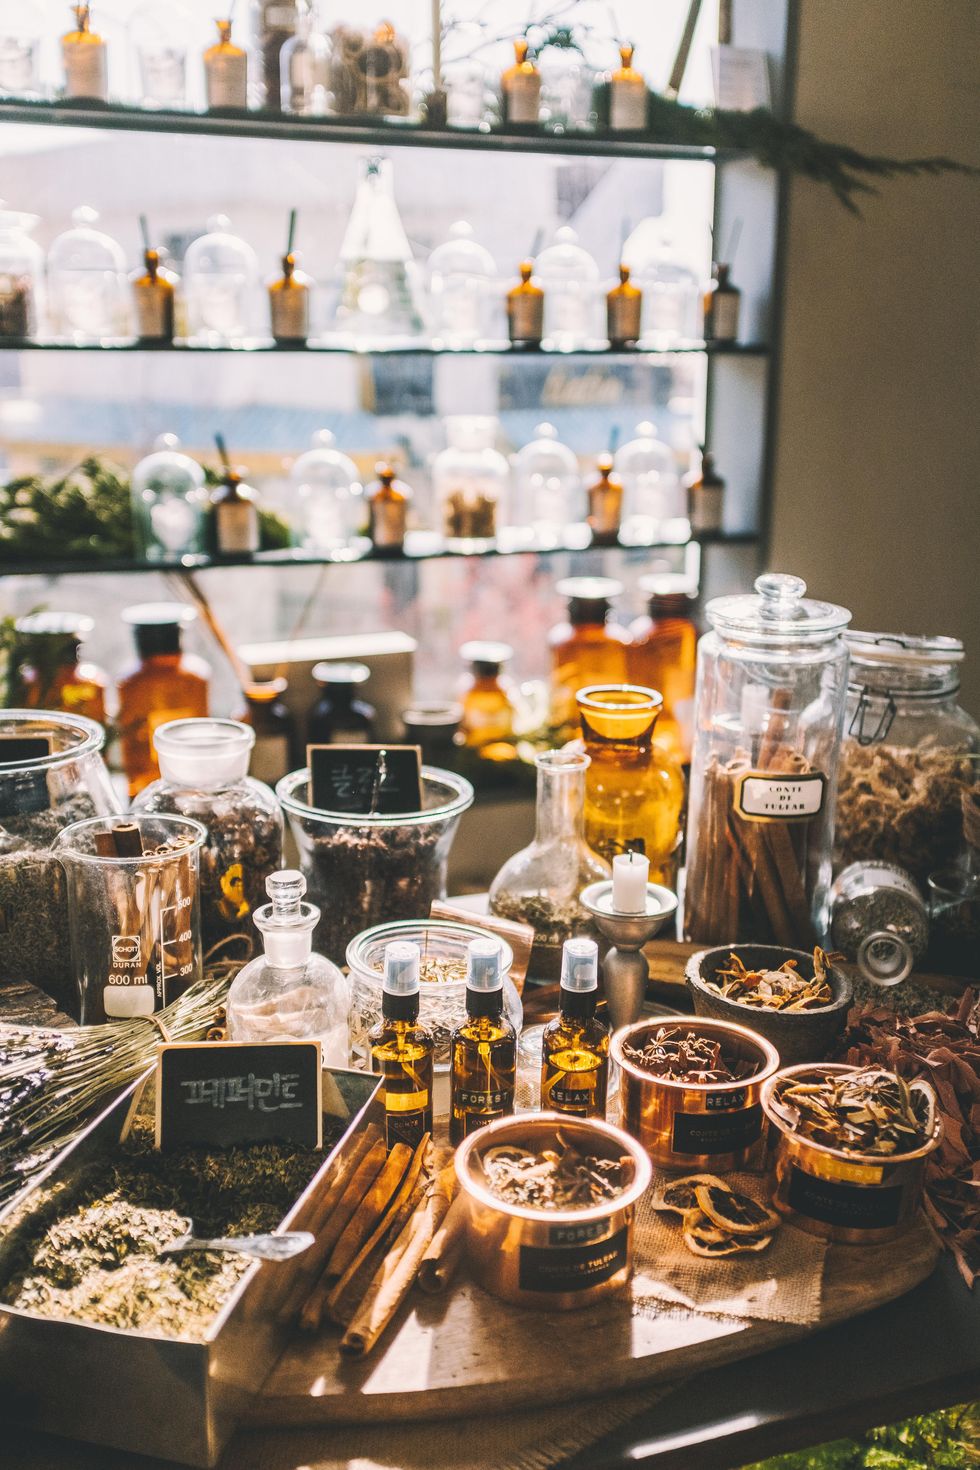 herbal products dried and in bottles